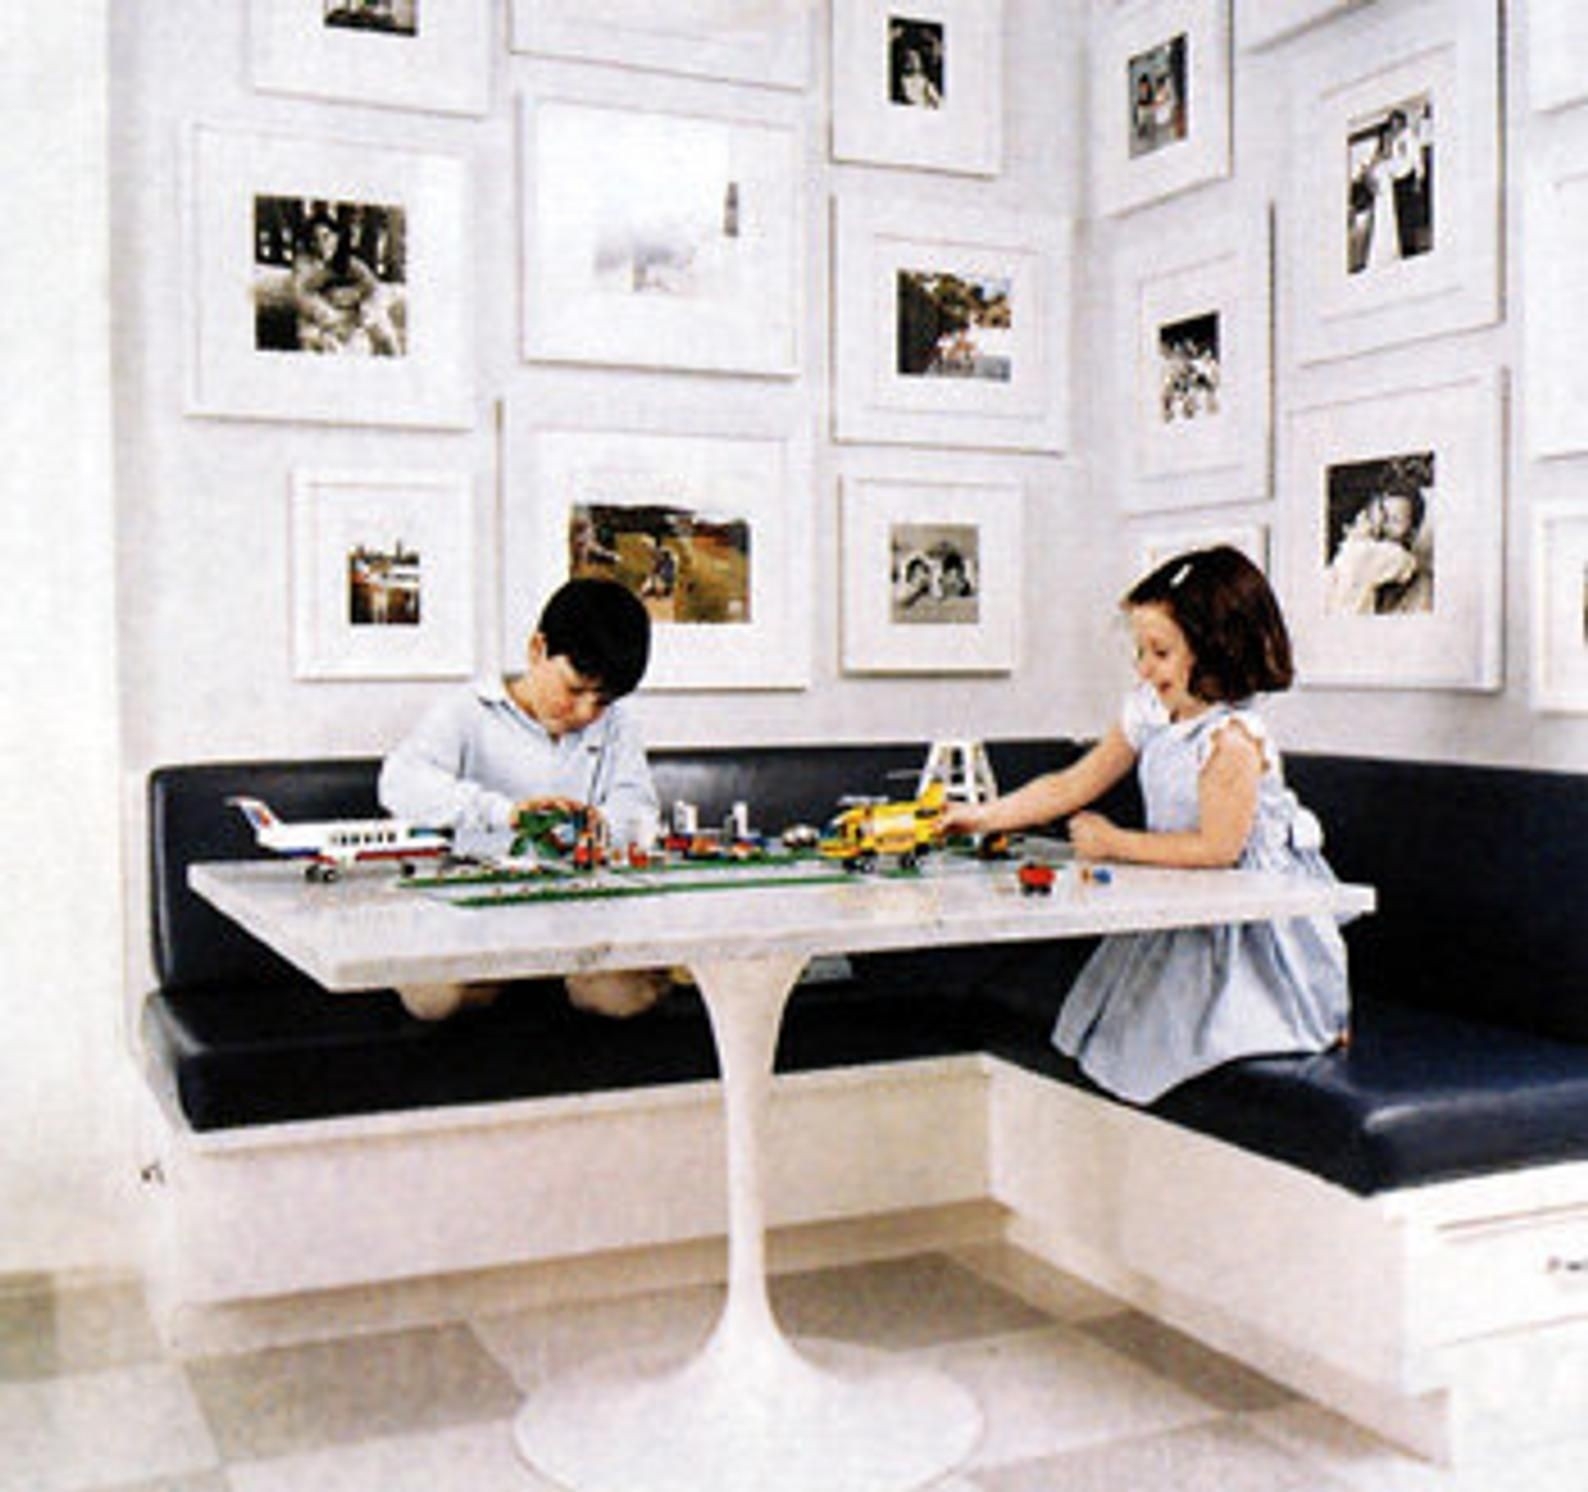 Corner Bench Dining Tables - Ideas on Foter